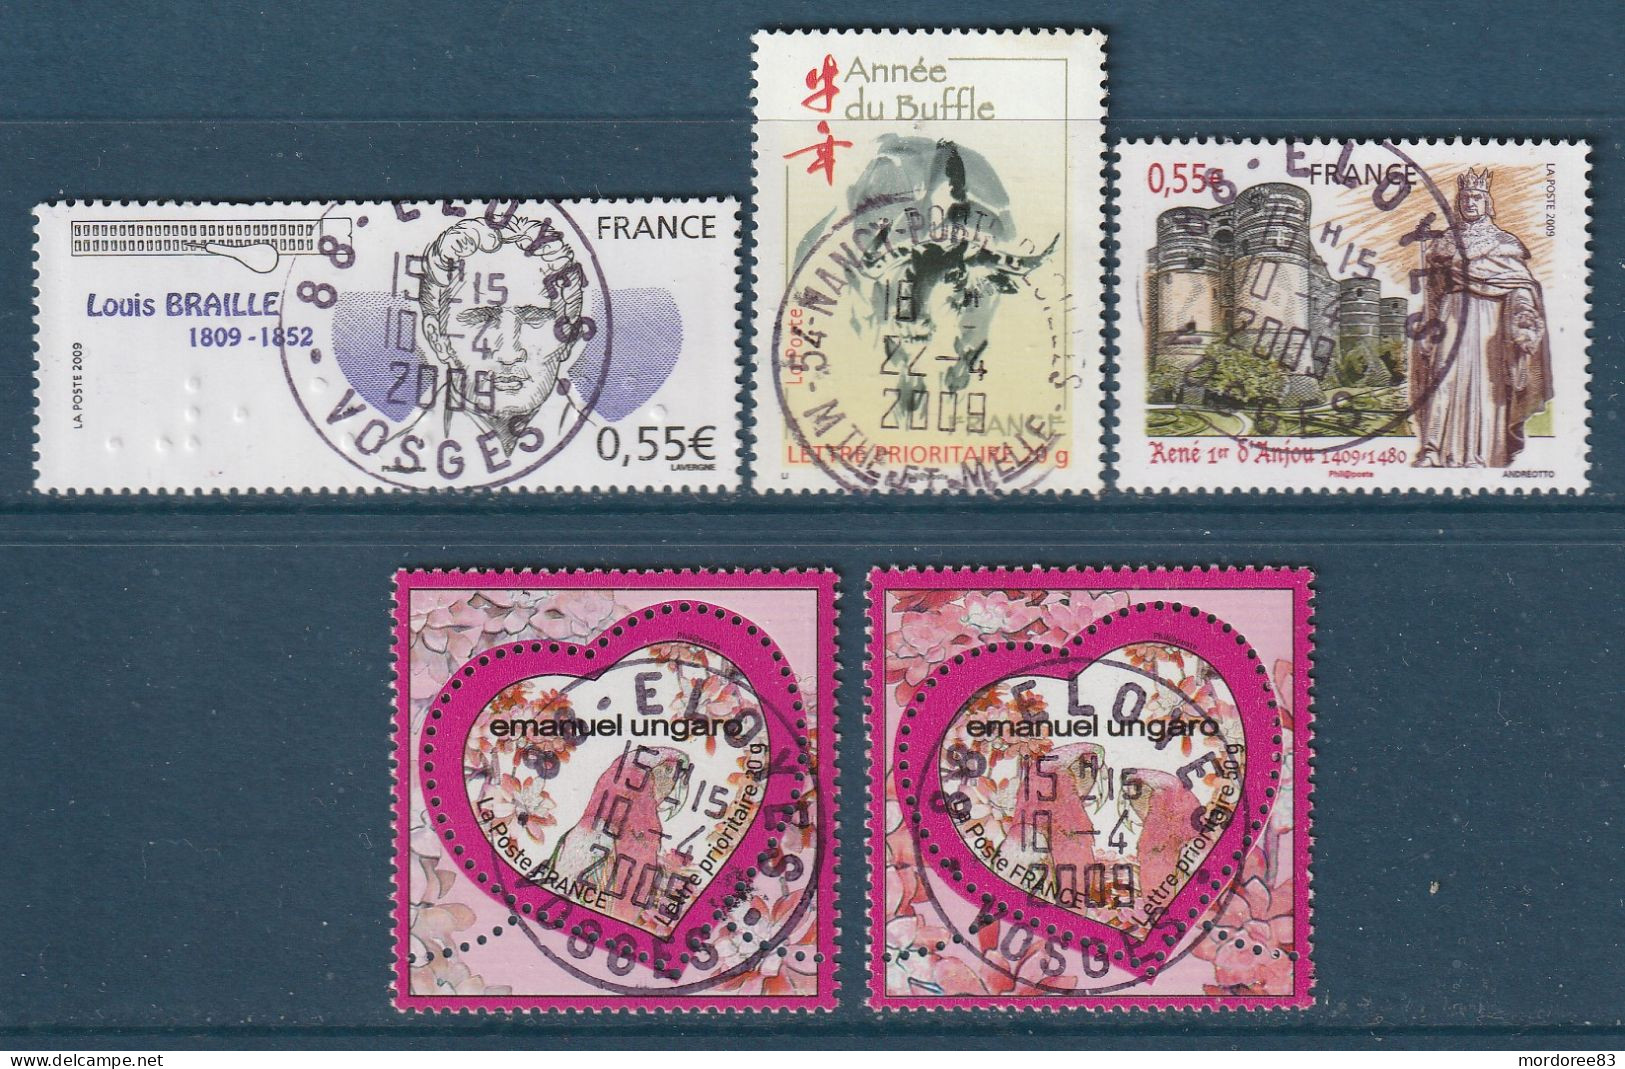 FRANCE 2009 LOT DE 5 TIMBRES OBLITERE A DATE YT 4324 A 4328 - Used Stamps